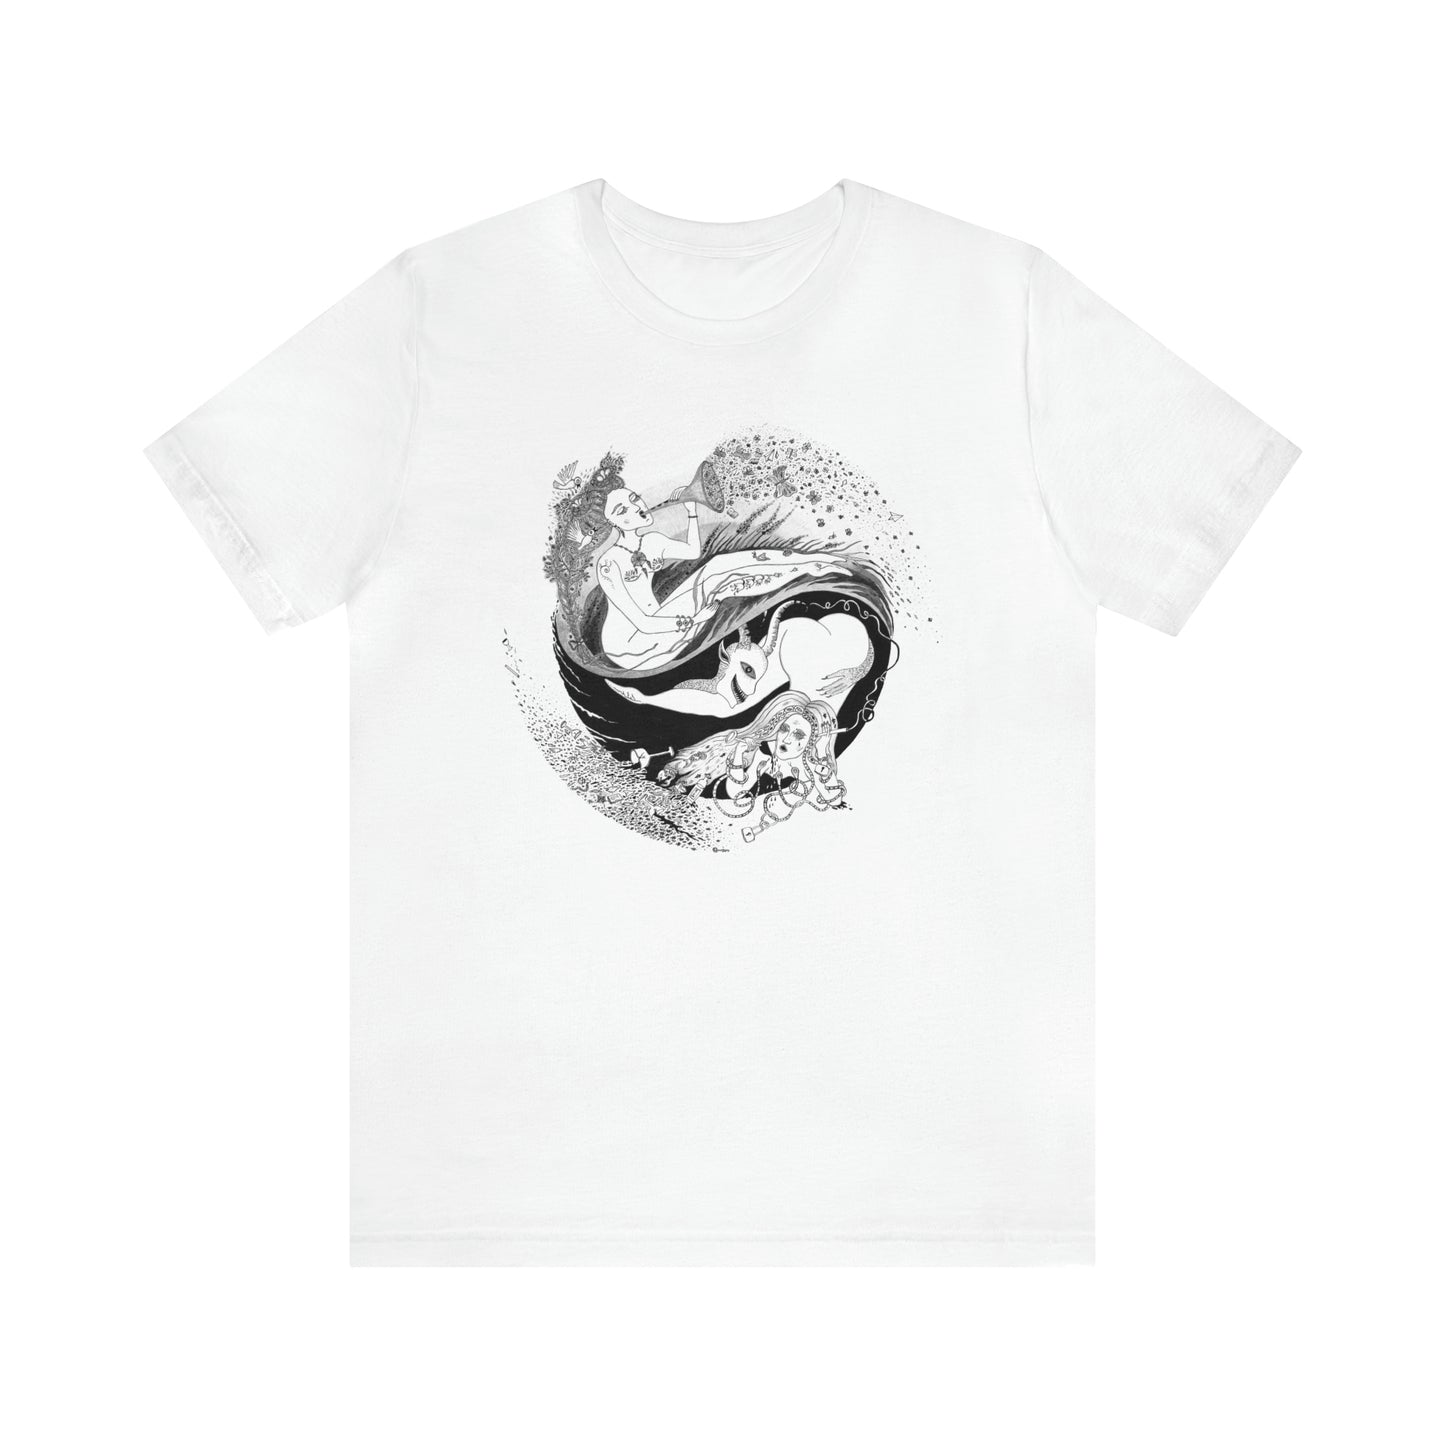 Special Edition "Circle Of Wine" Man White & Black Tee